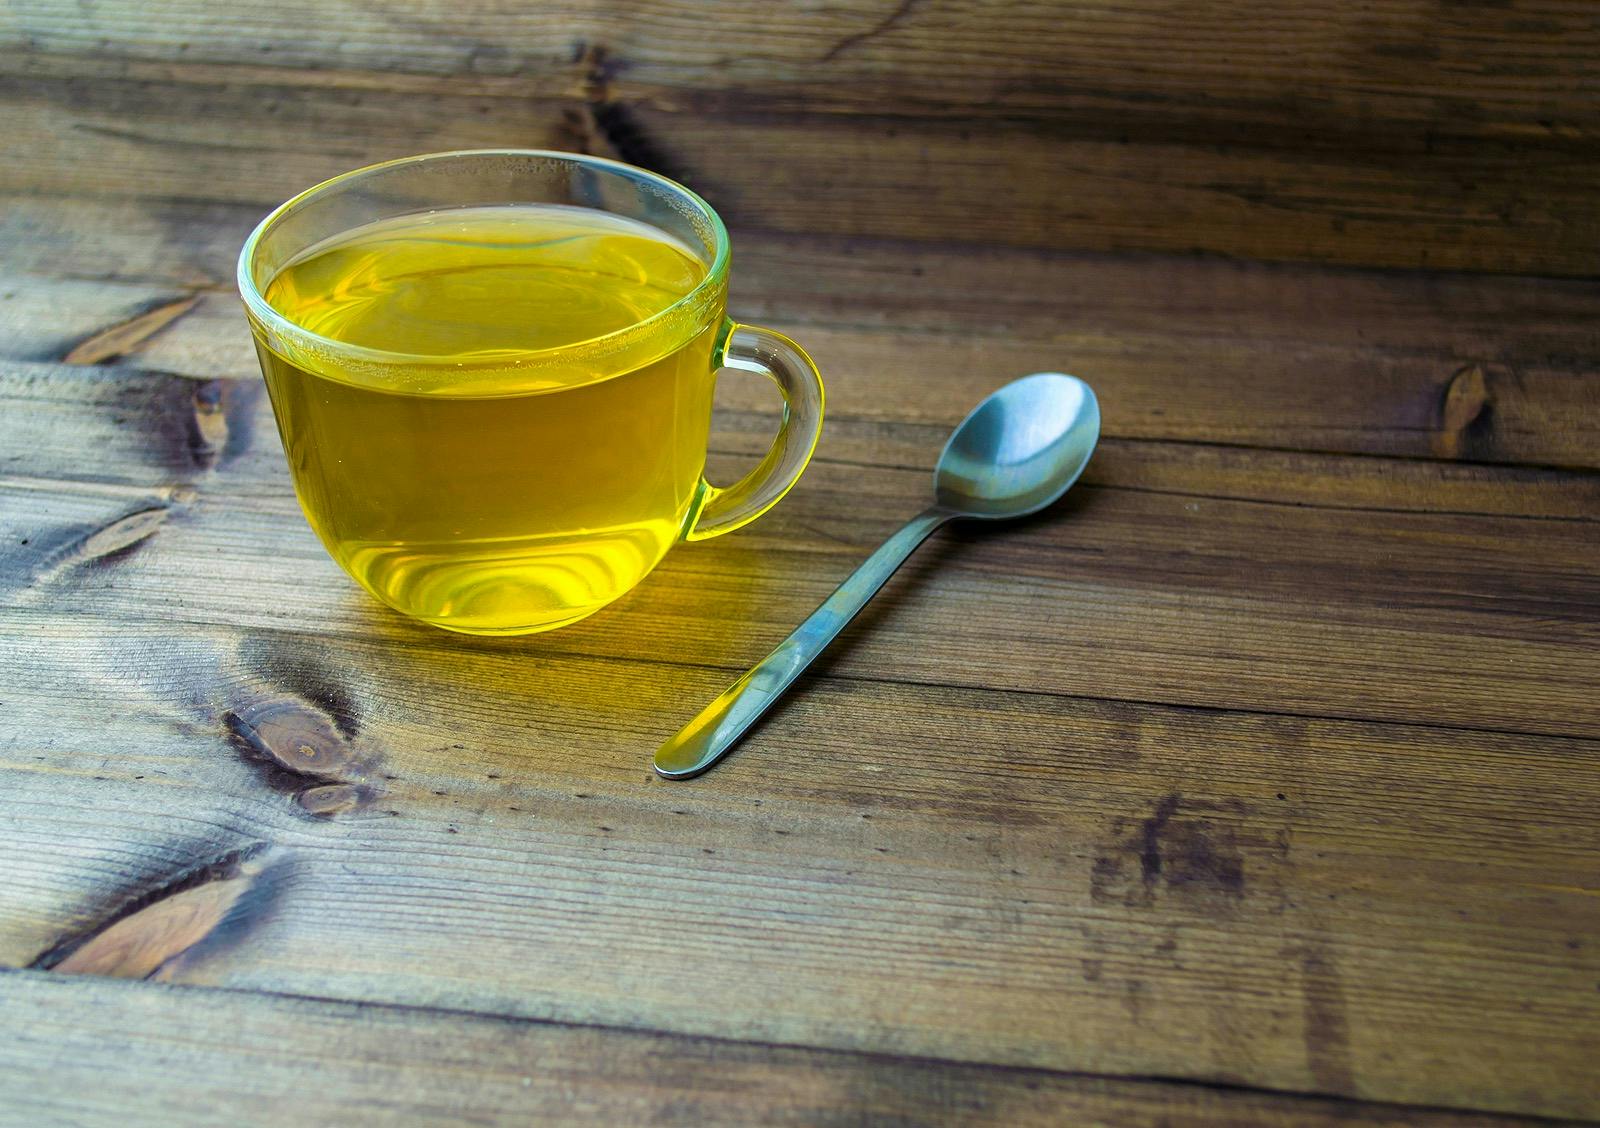 Green tea and spoon. Green tea and a spoon on a wooden table.
